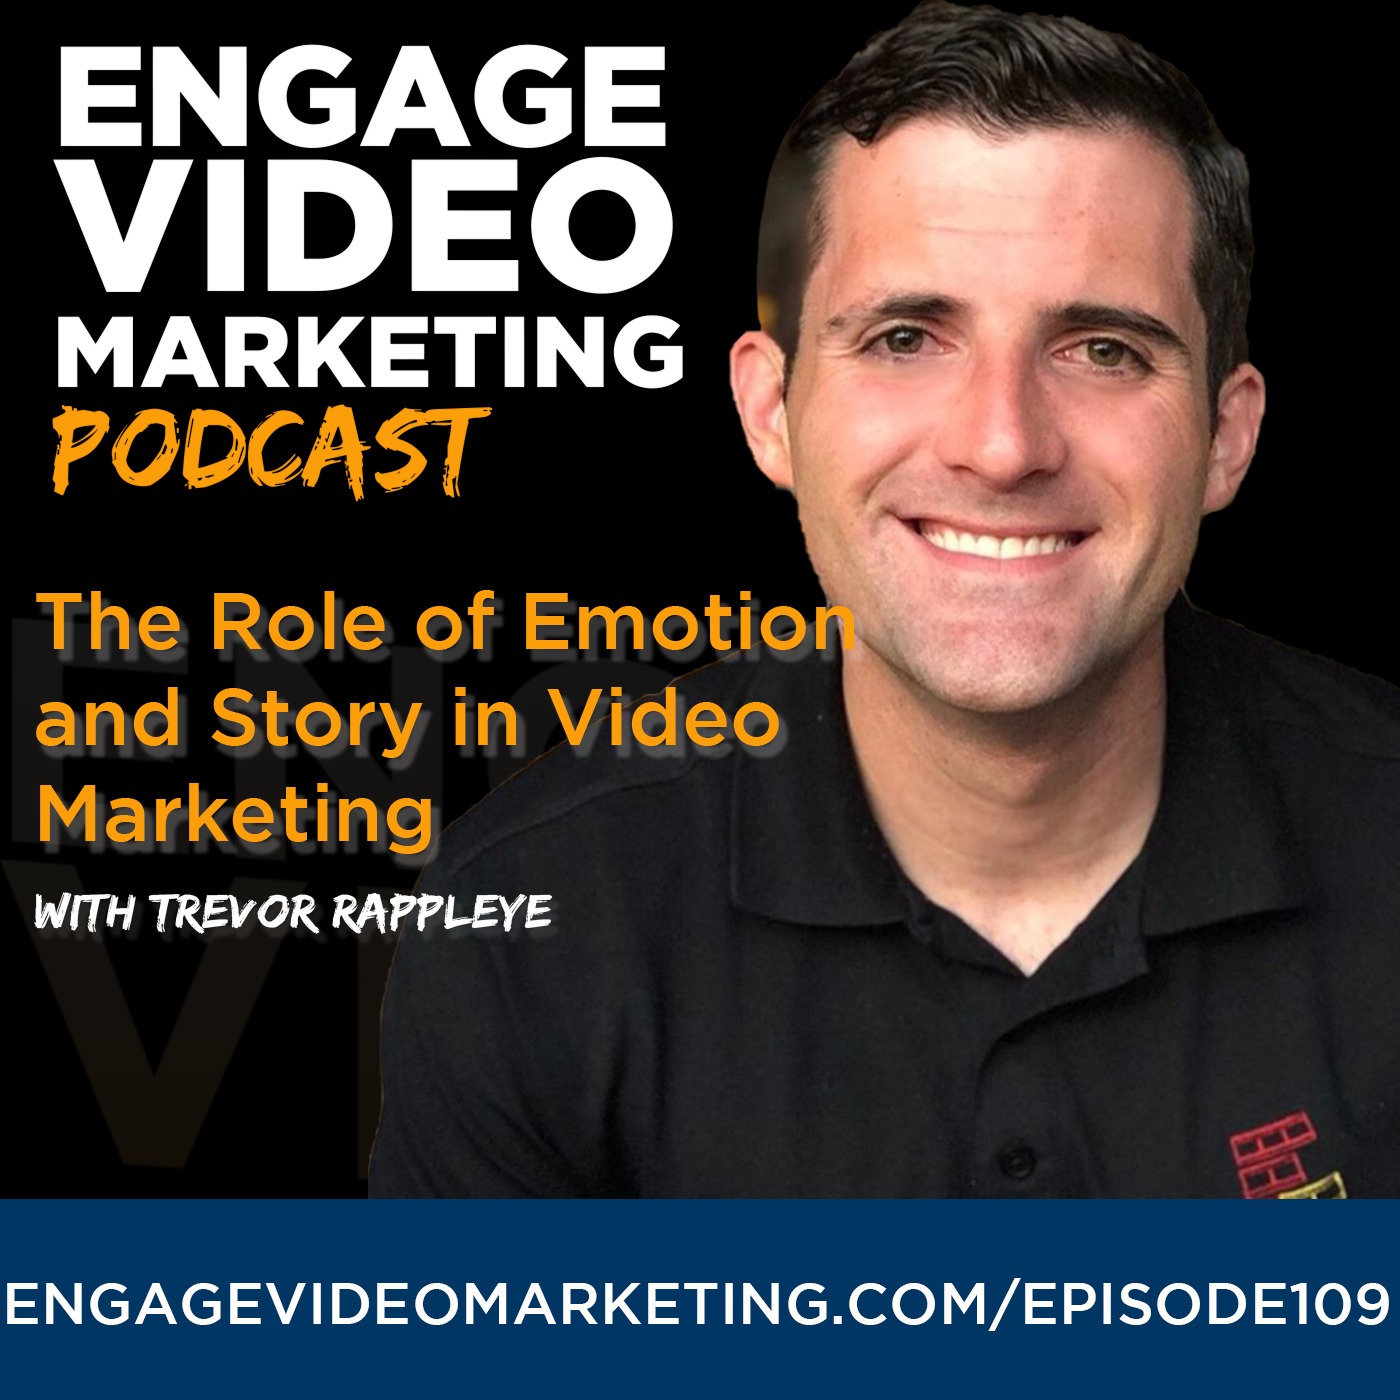 The Role of Emotion and Storytelling in Video Marketing with Trevor Rappleye